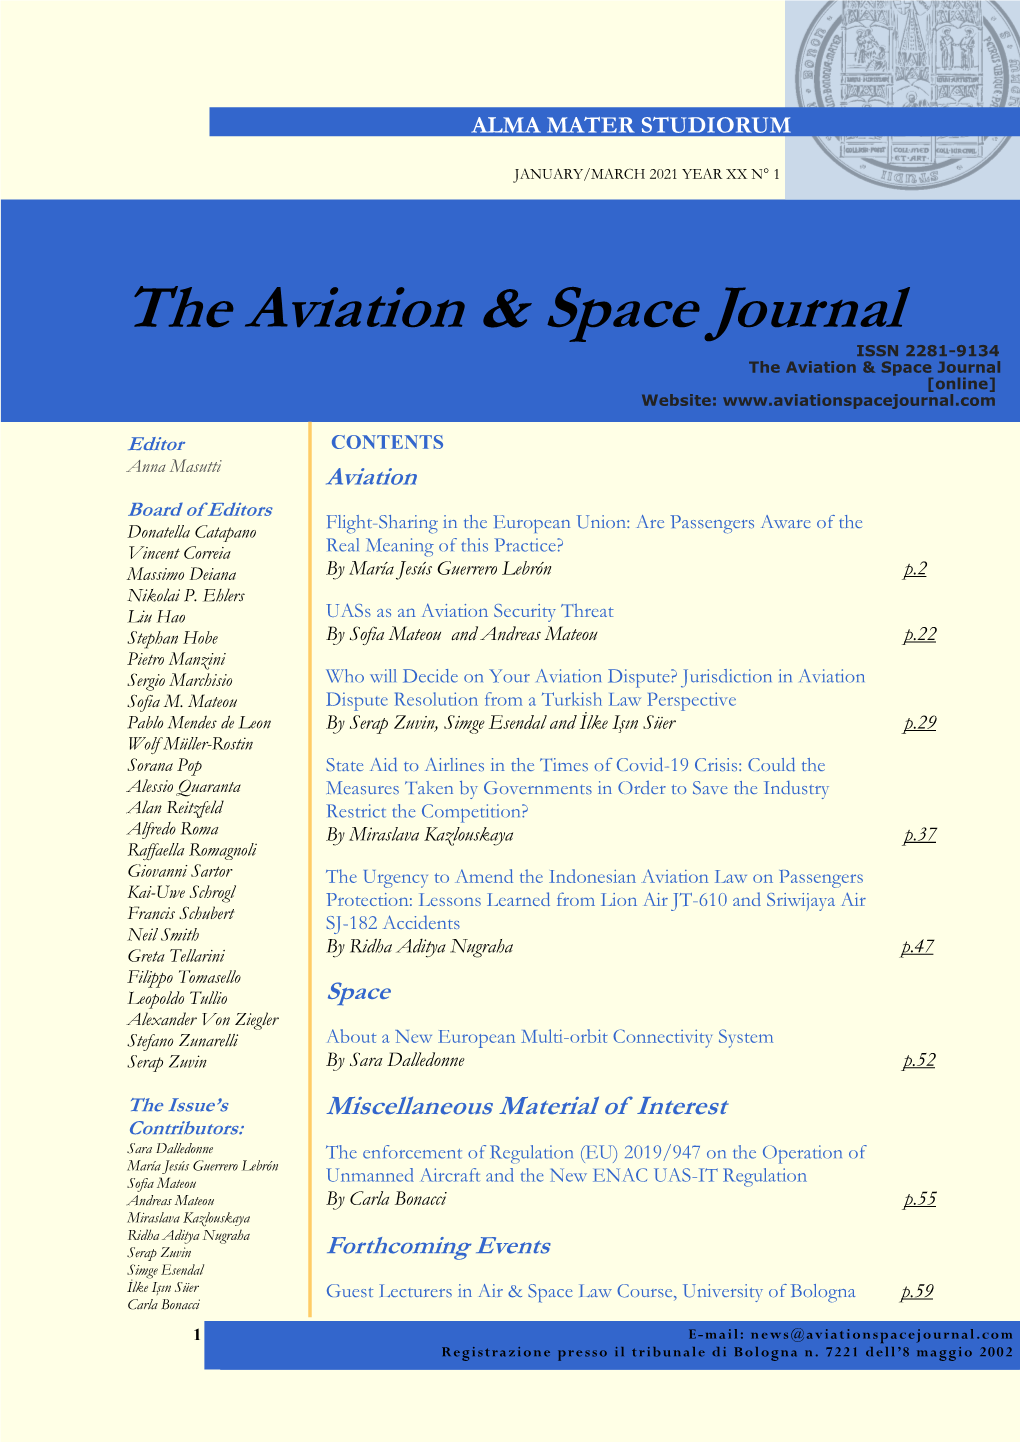 The Aviation & Space Journal